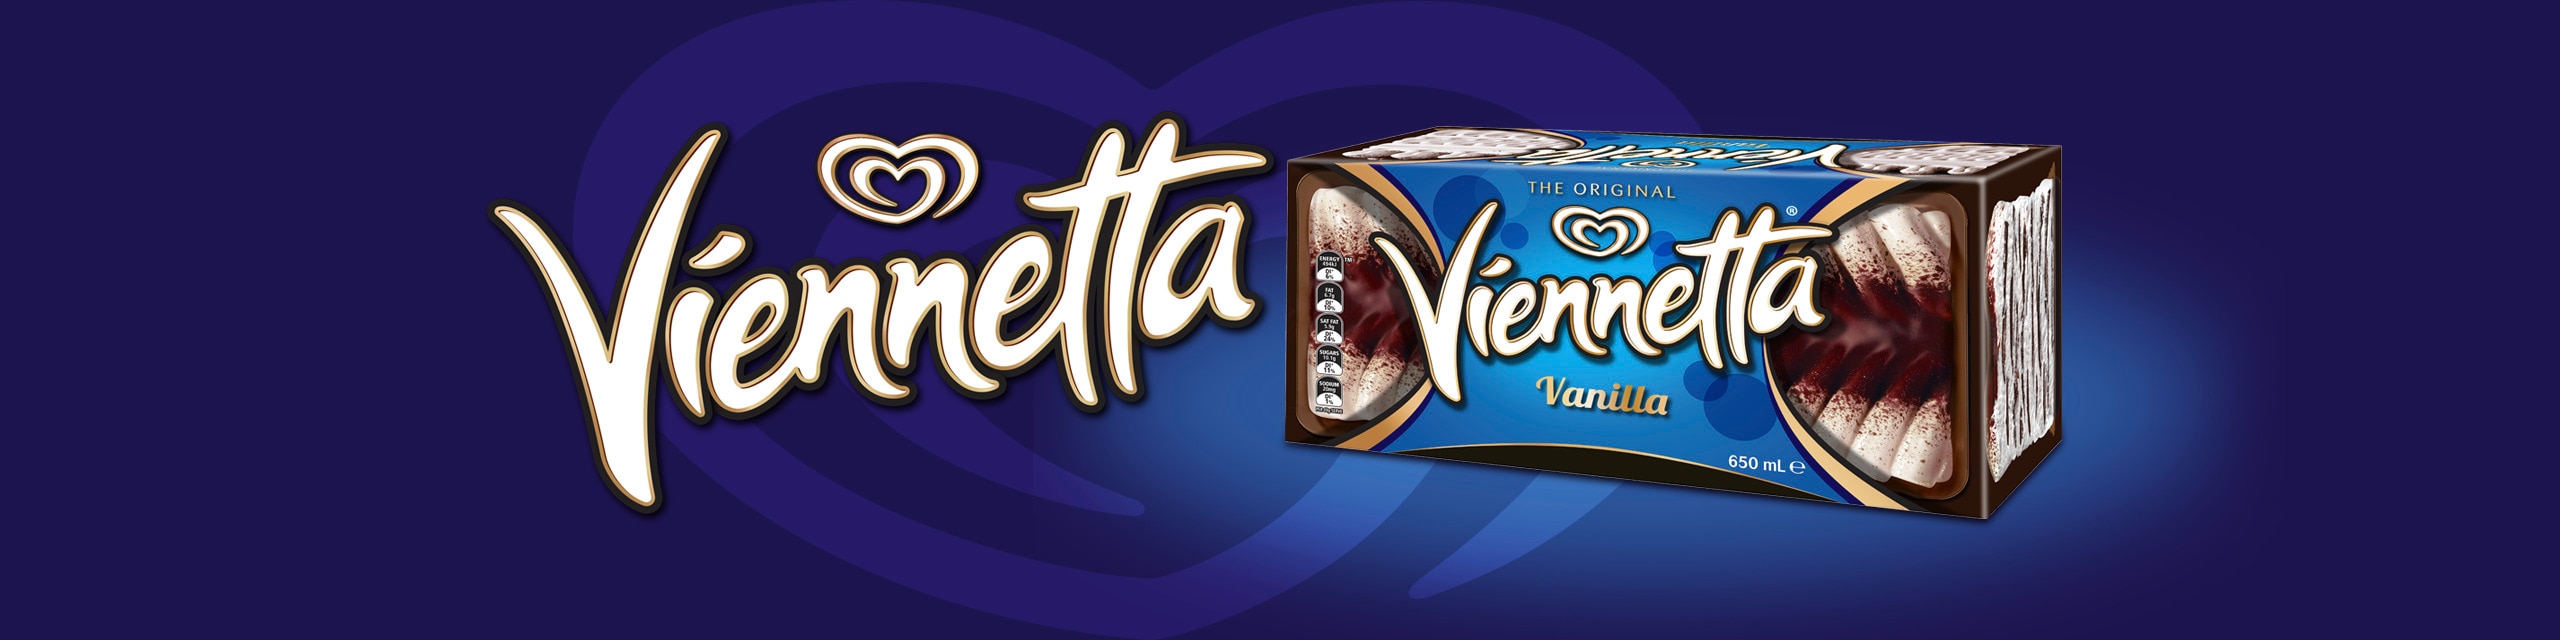 Viennetta Classic Vanilla Icecream pack placed in the centre with some servings on the right on a plate